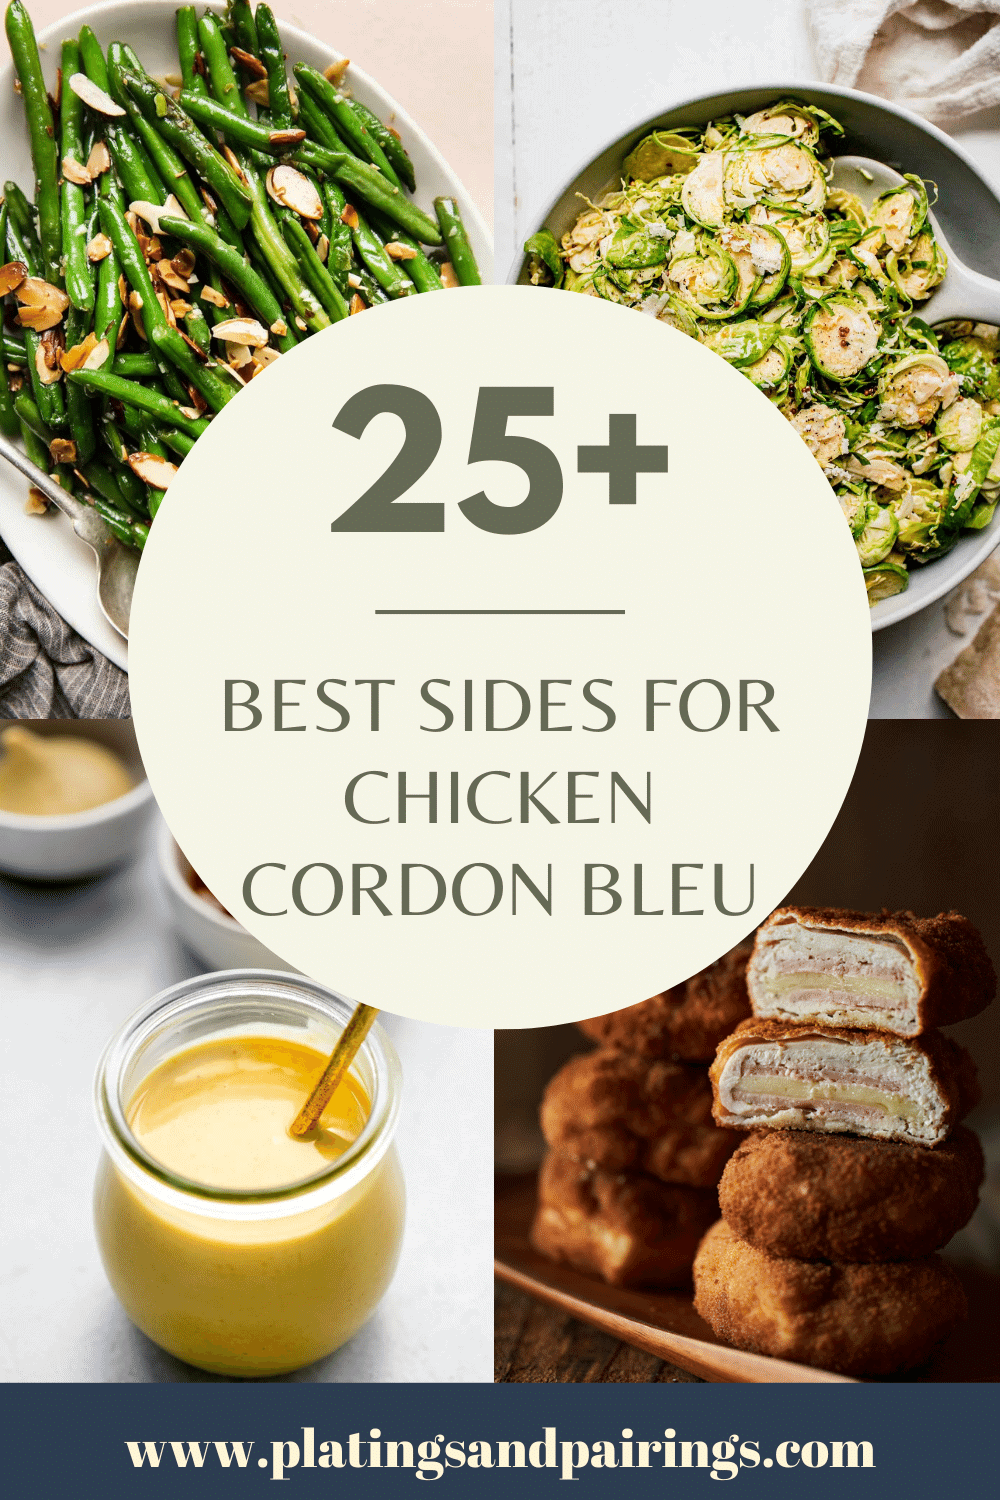 COLLAGE OF Chicken cordon bleu side dishes with text overlay.